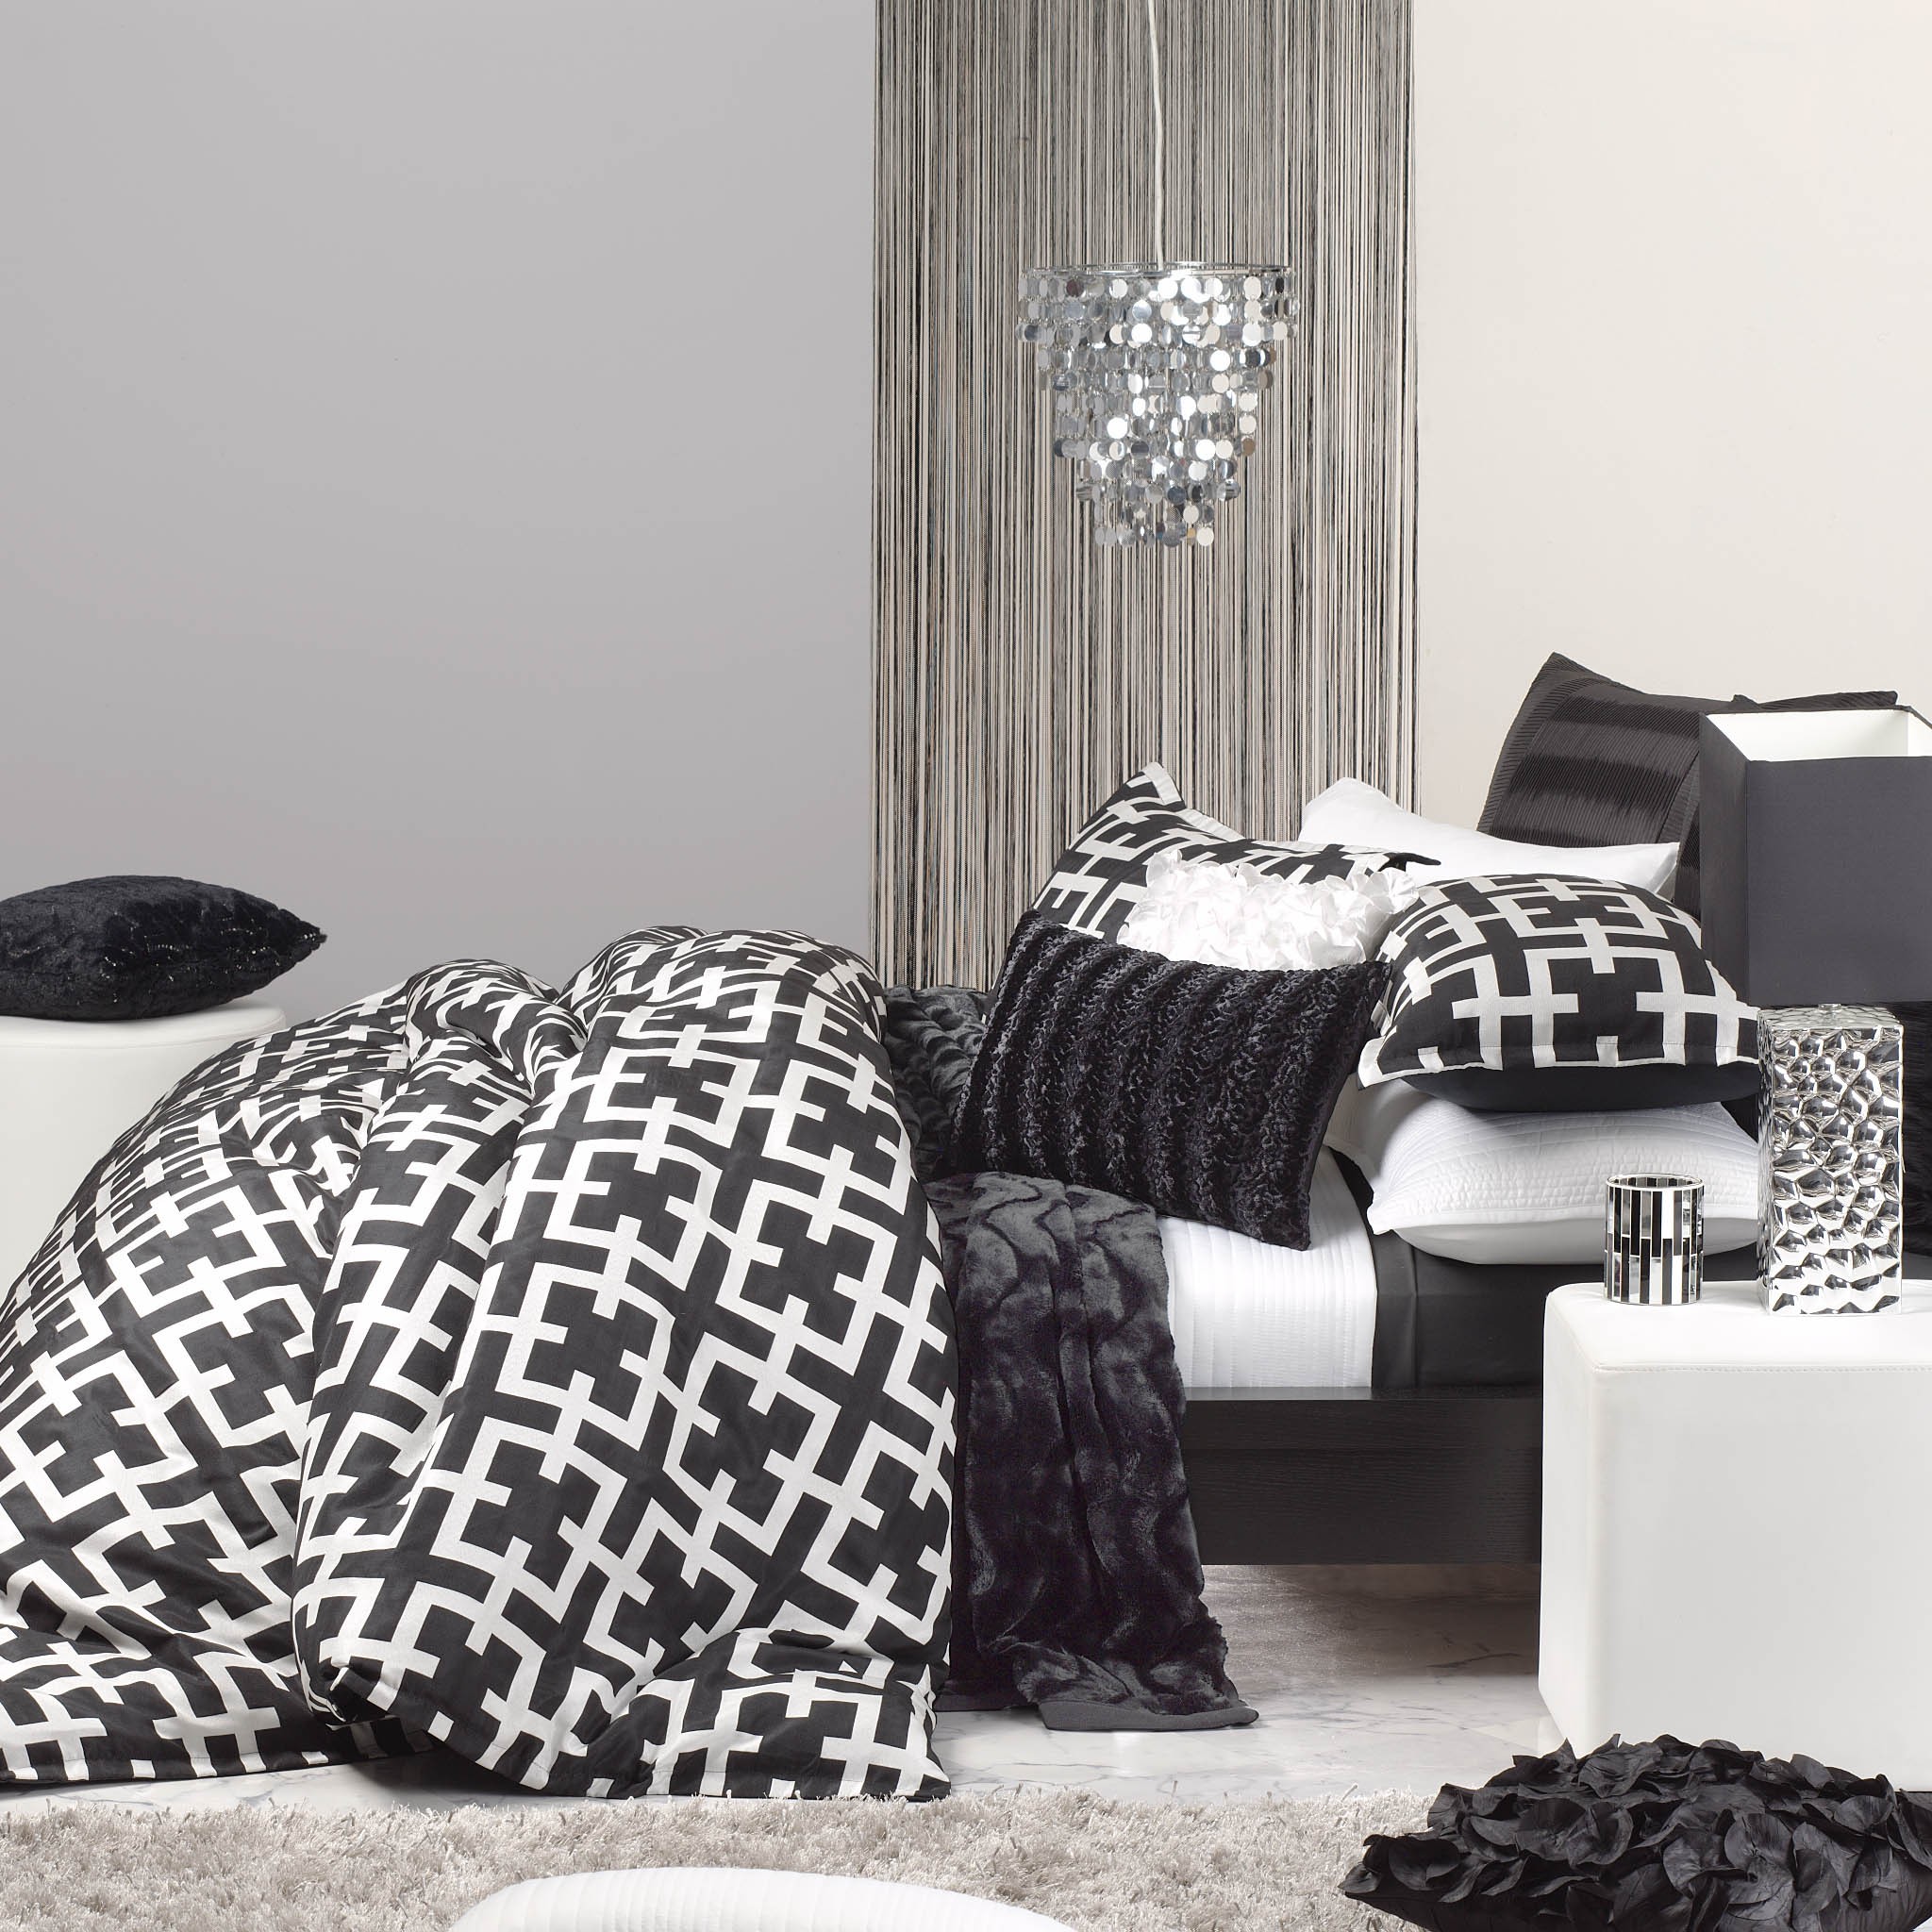 Crytal Chandelier Modern Fabulous Crystal Chandelier Hanging In Modern Bedroom Involved Black And White Duvet Covers On Wooden Bed With White Nightstand Bedroom  Cozy Black And White Duvet Covers Collection For Comfortable Bedrooms